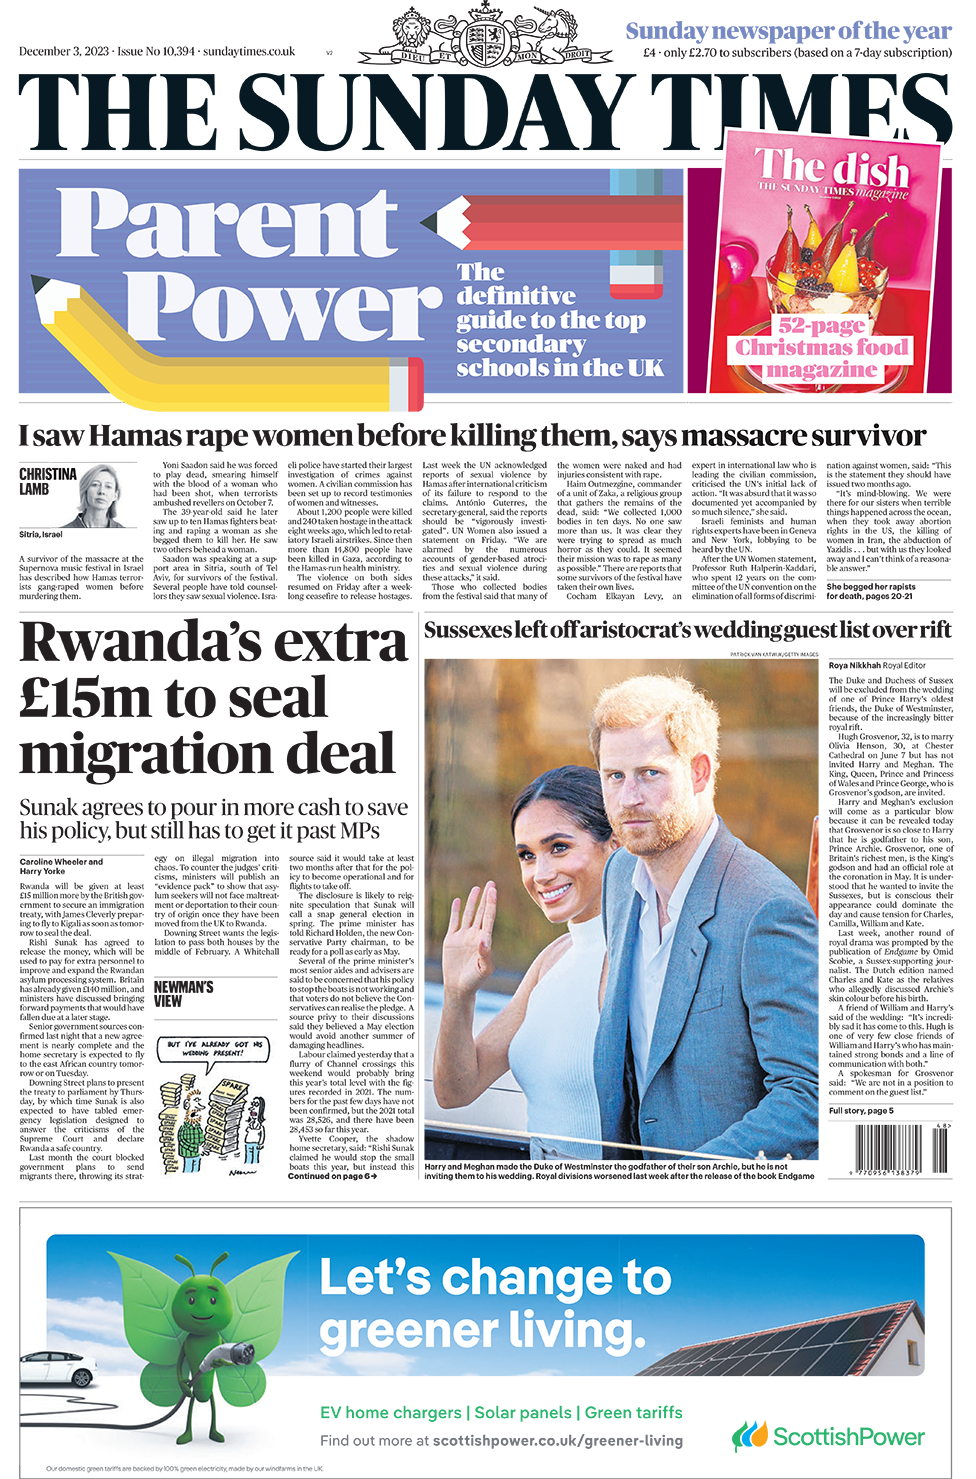 The main headline on the front page of the Sunday Times reads: "Rwanda's extra £15m to seal migration deal"